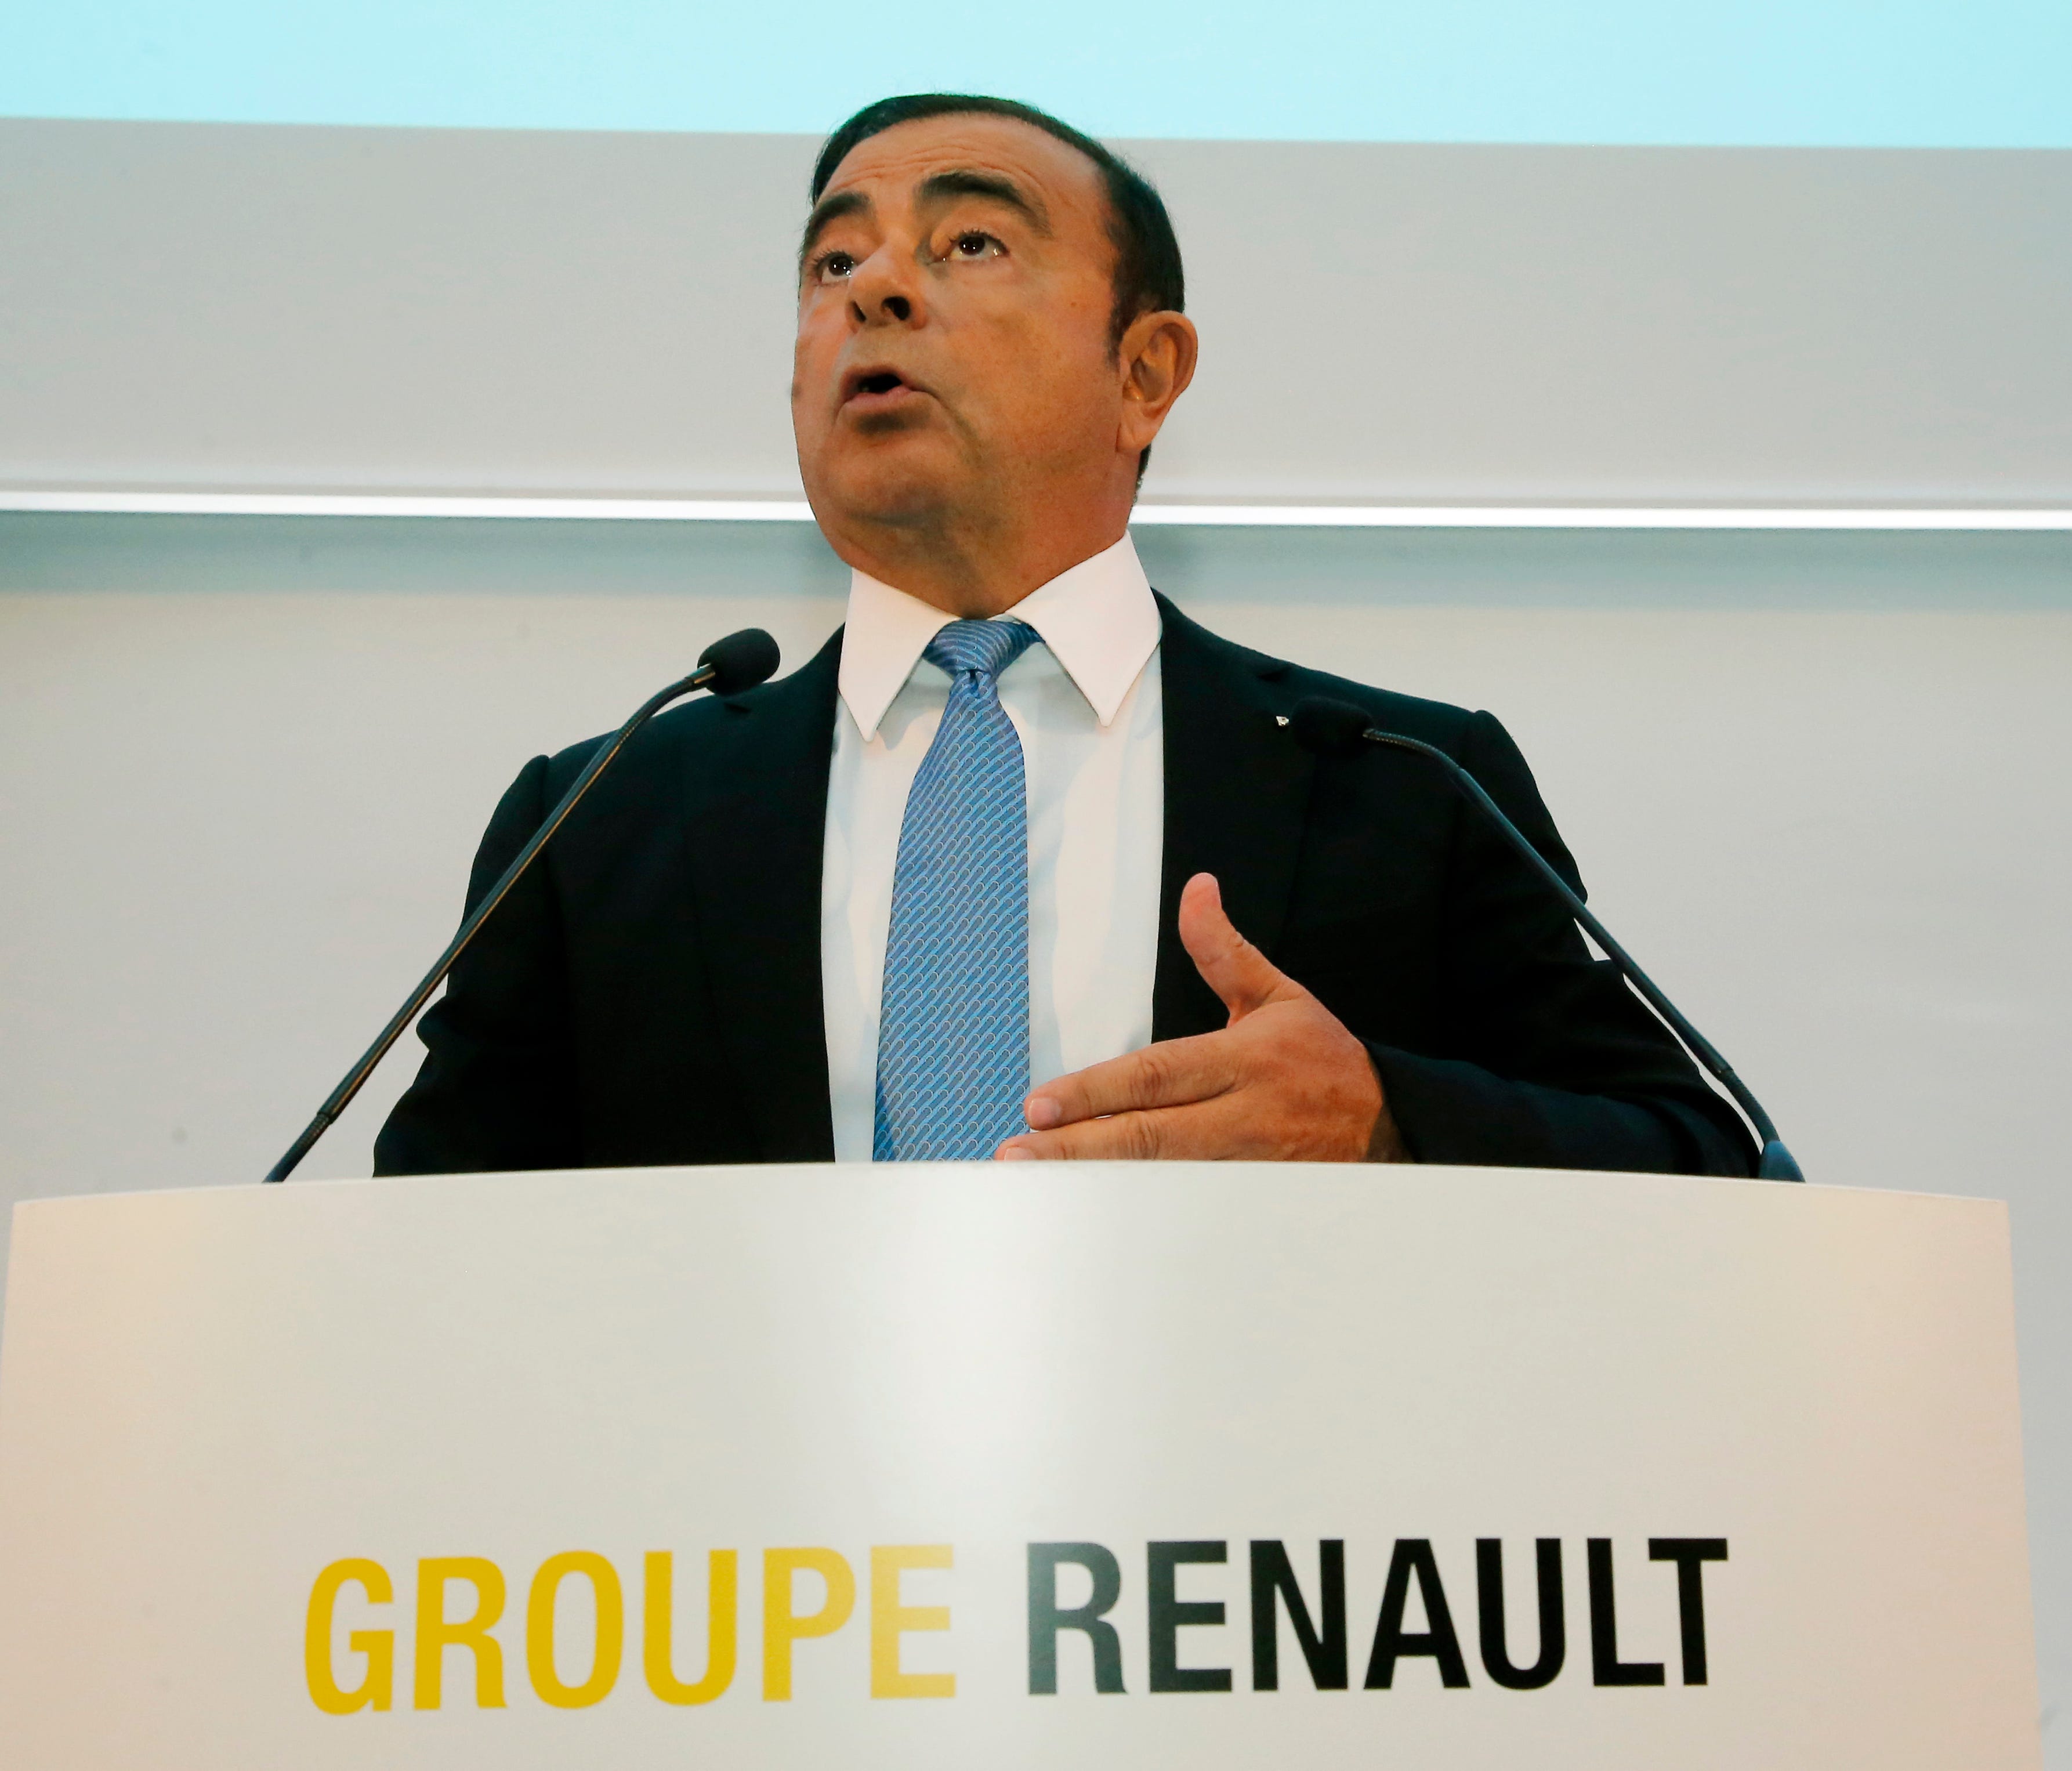 Renault Group CEO Carlos Ghosn speaks during a media conference at La Defense business district, outside Paris, France, Friday, Oct. 6, 2017. French carmaker Renault says half of its models will be electric or hybrid by 2022 and it's investing heavil